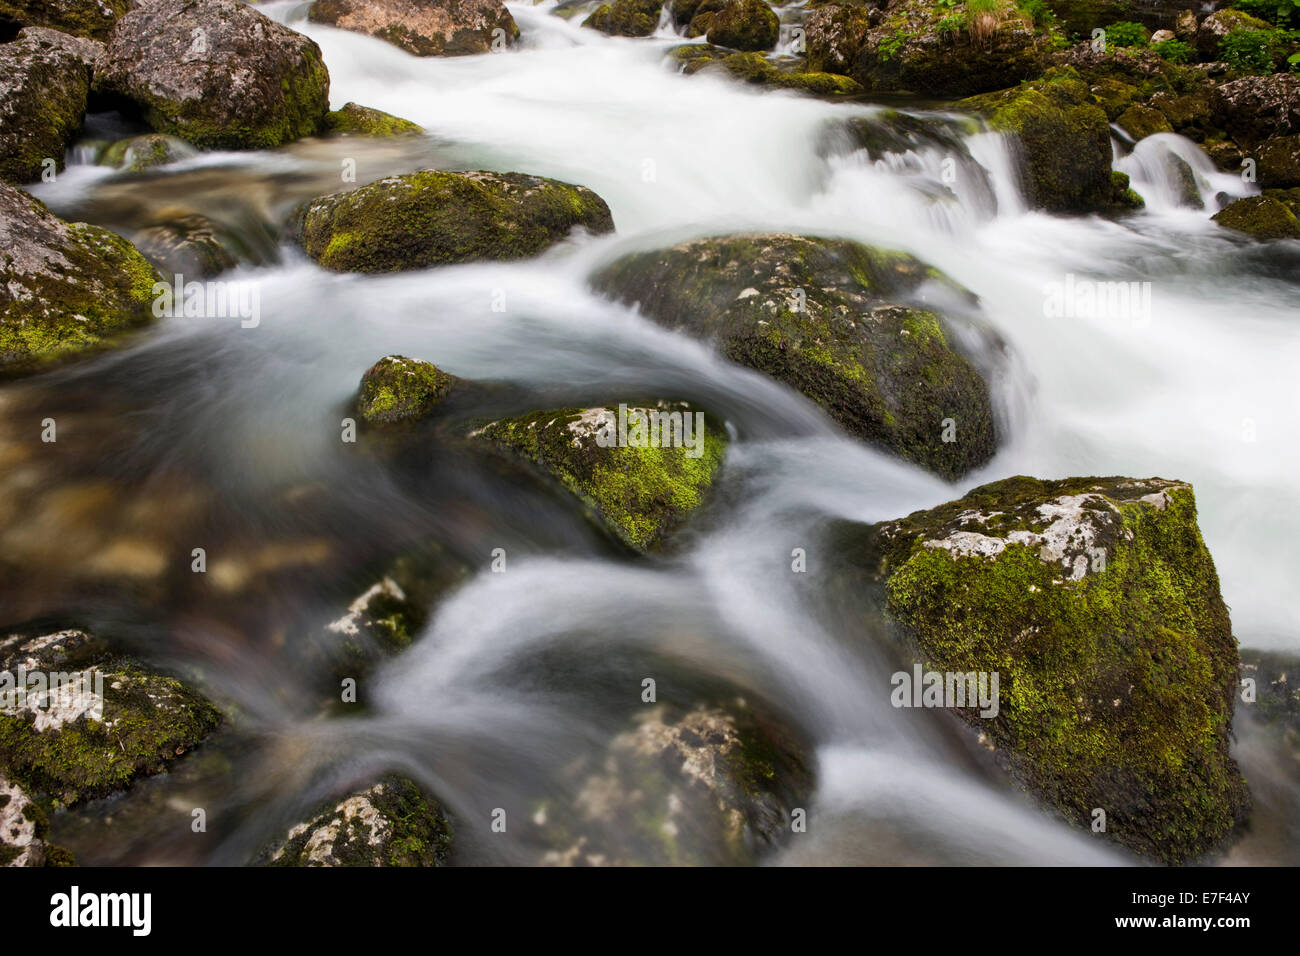 Brook with moss-covered stones, Golling Waterfall, Salzburg, Austria Stock Photo